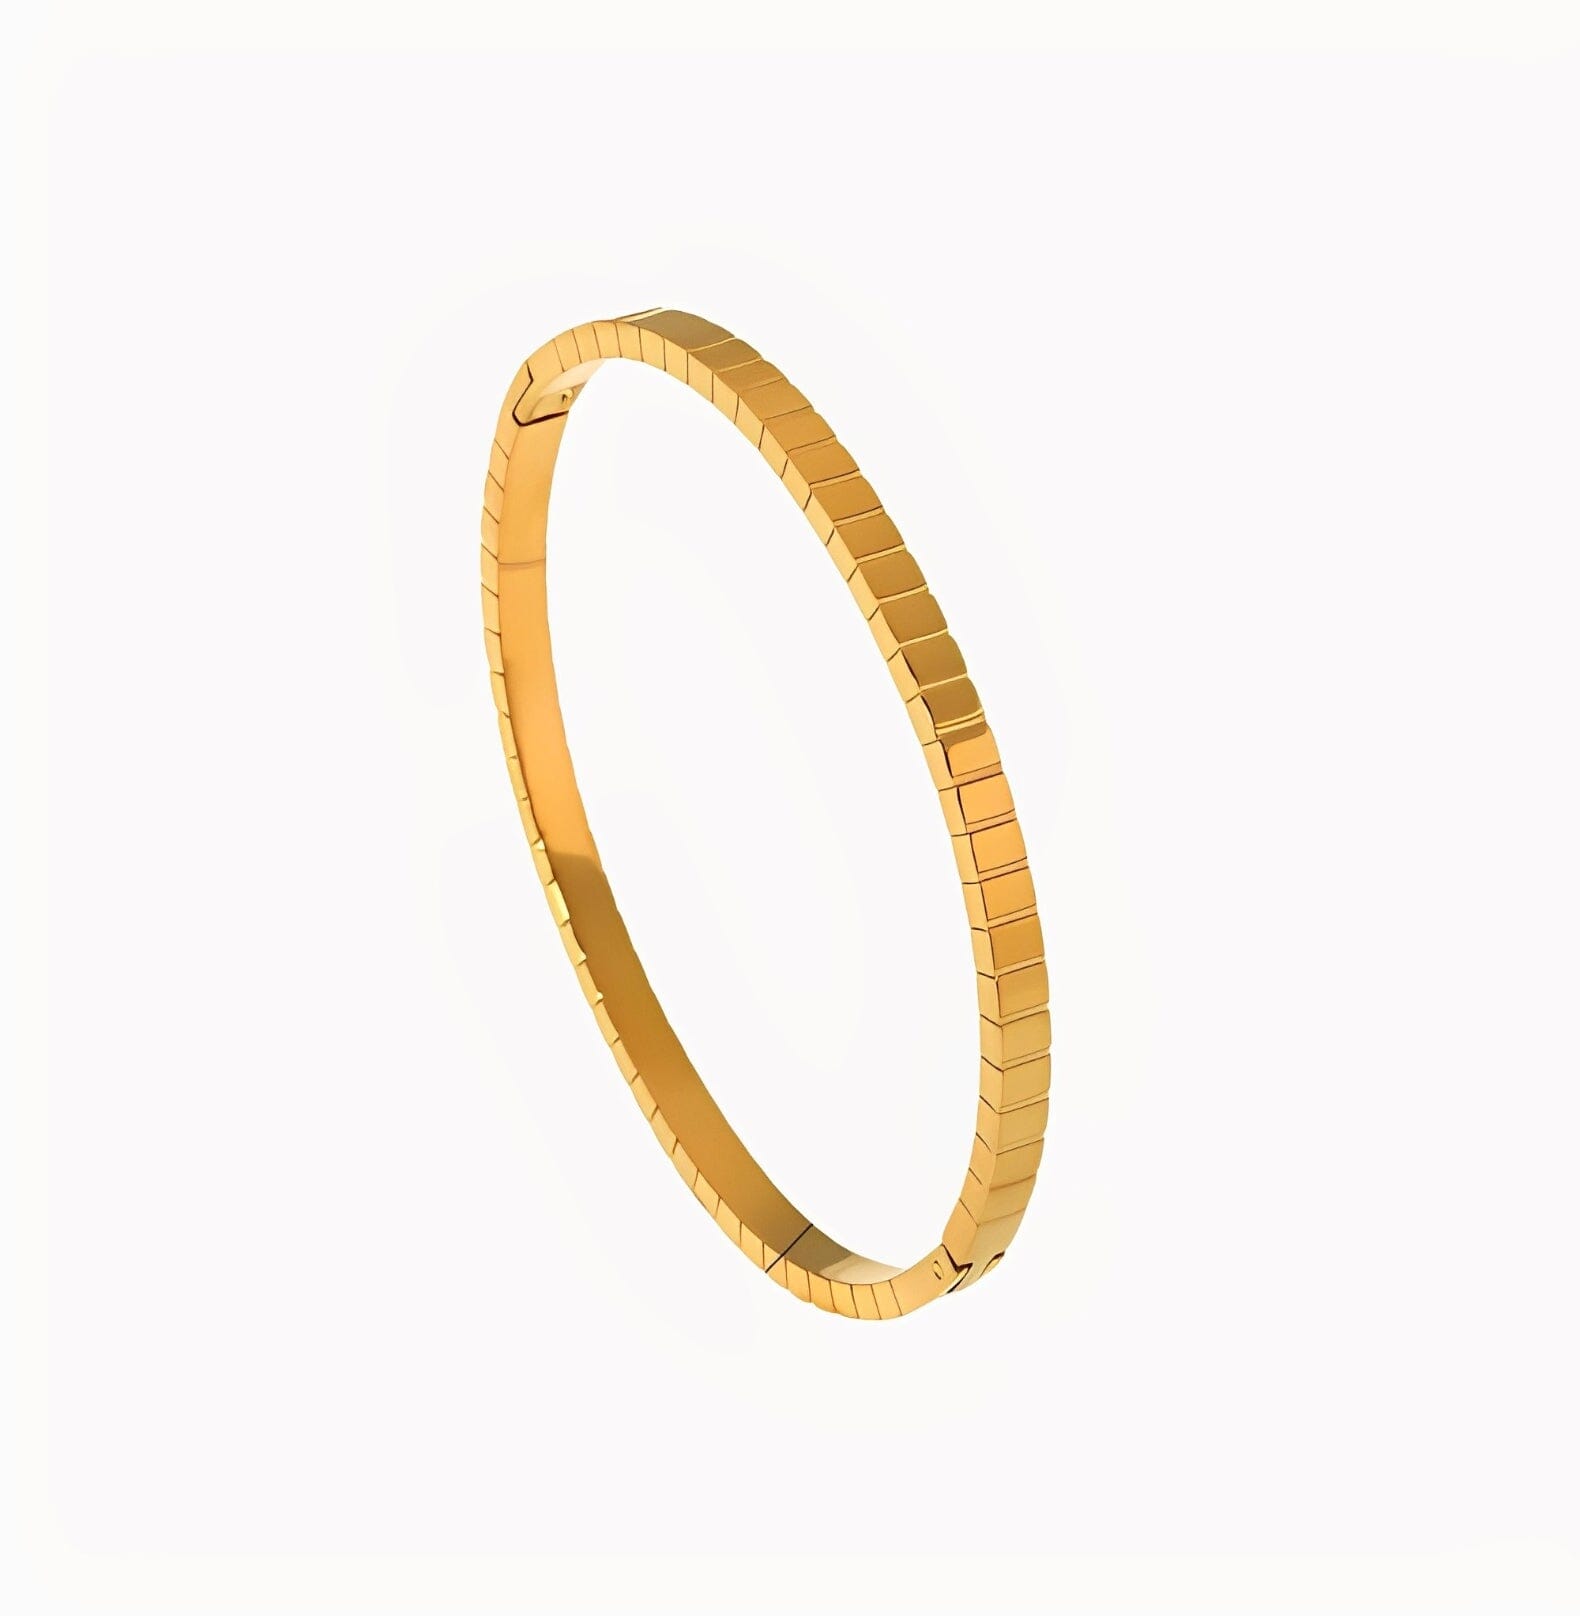 KYLE BANGLE BRACELET braclet Yubama Jewelry Online Store - The Elegant Designs of Gold and Silver ! 